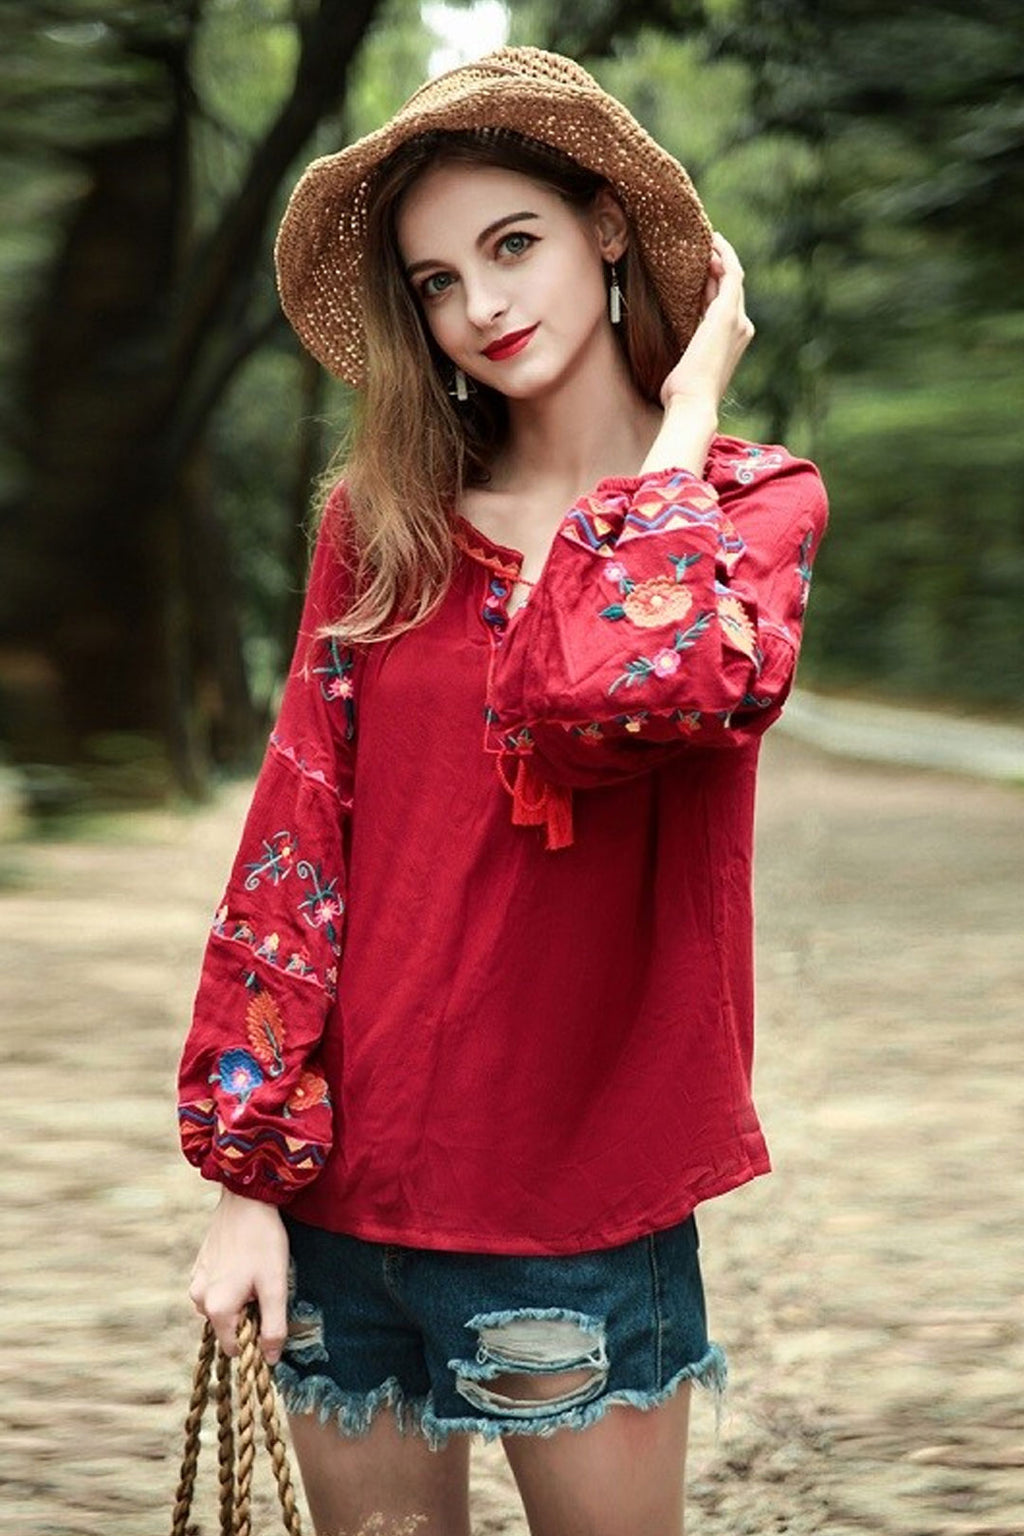 Boho Tops for Women, Boho Tops for Women, Boho Blouse, Embroidery